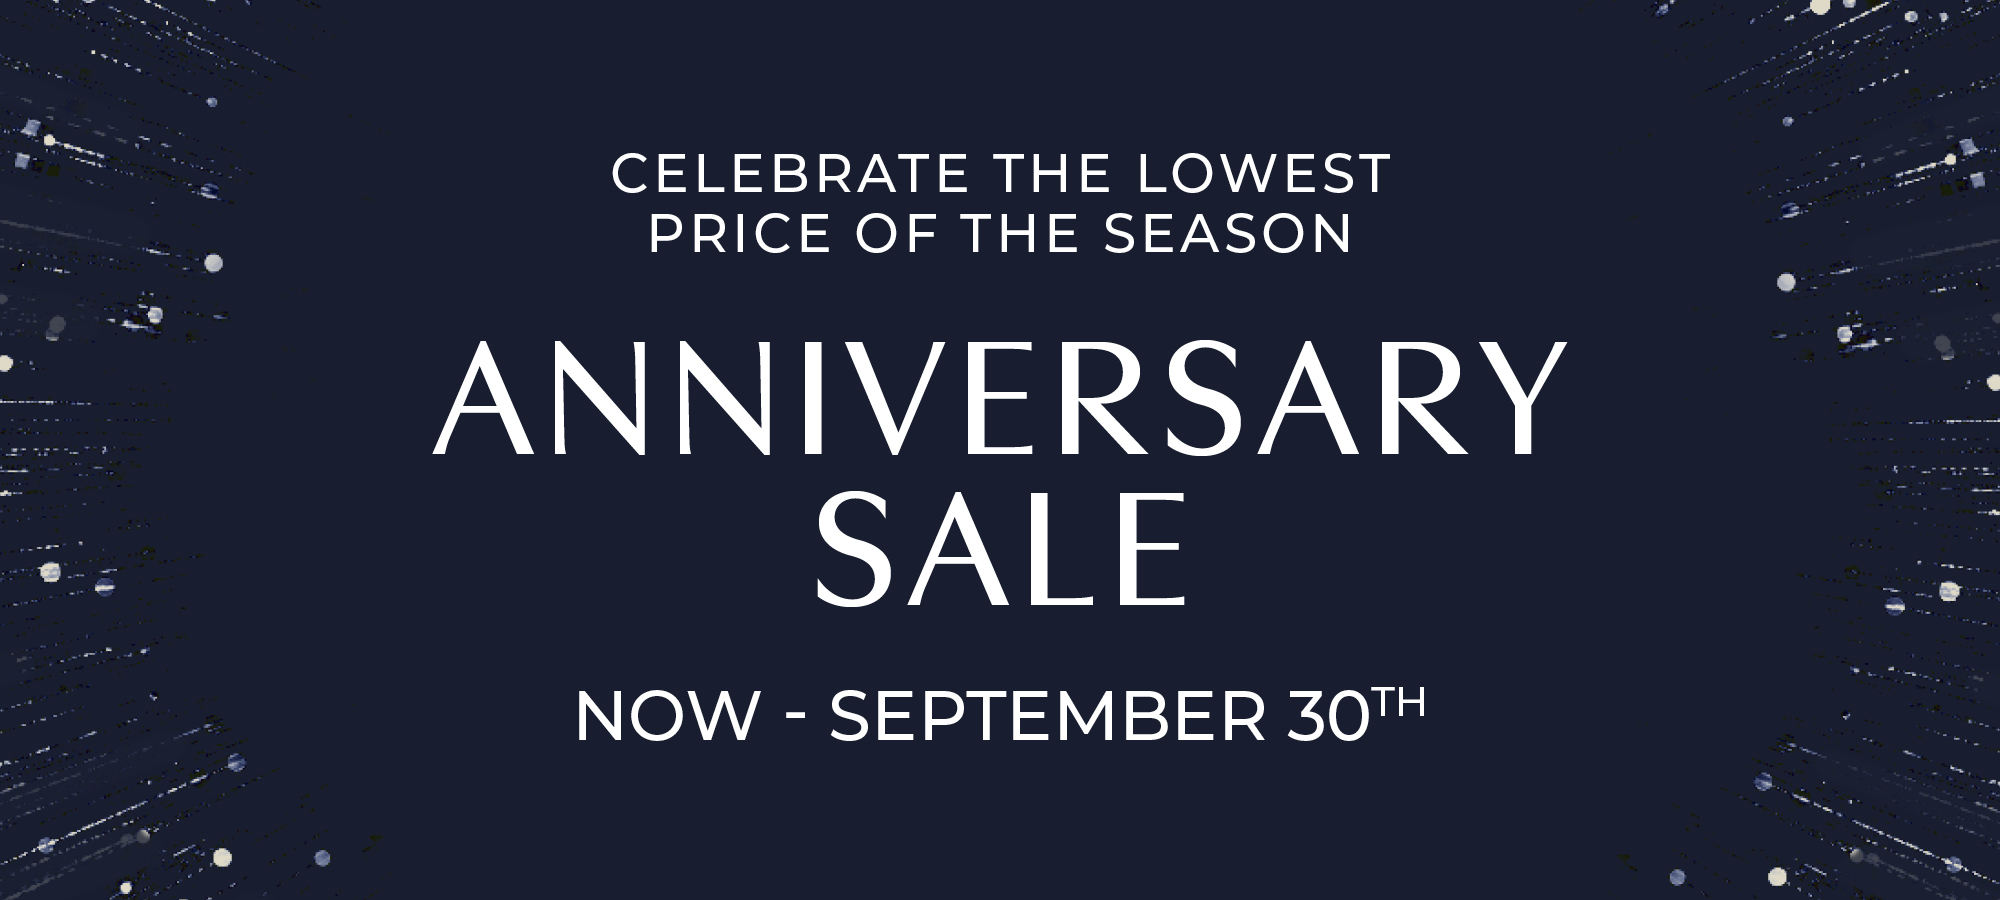 Celebrate the Lowest Price of the Season Anniversary Sale Now - Sept. 30th